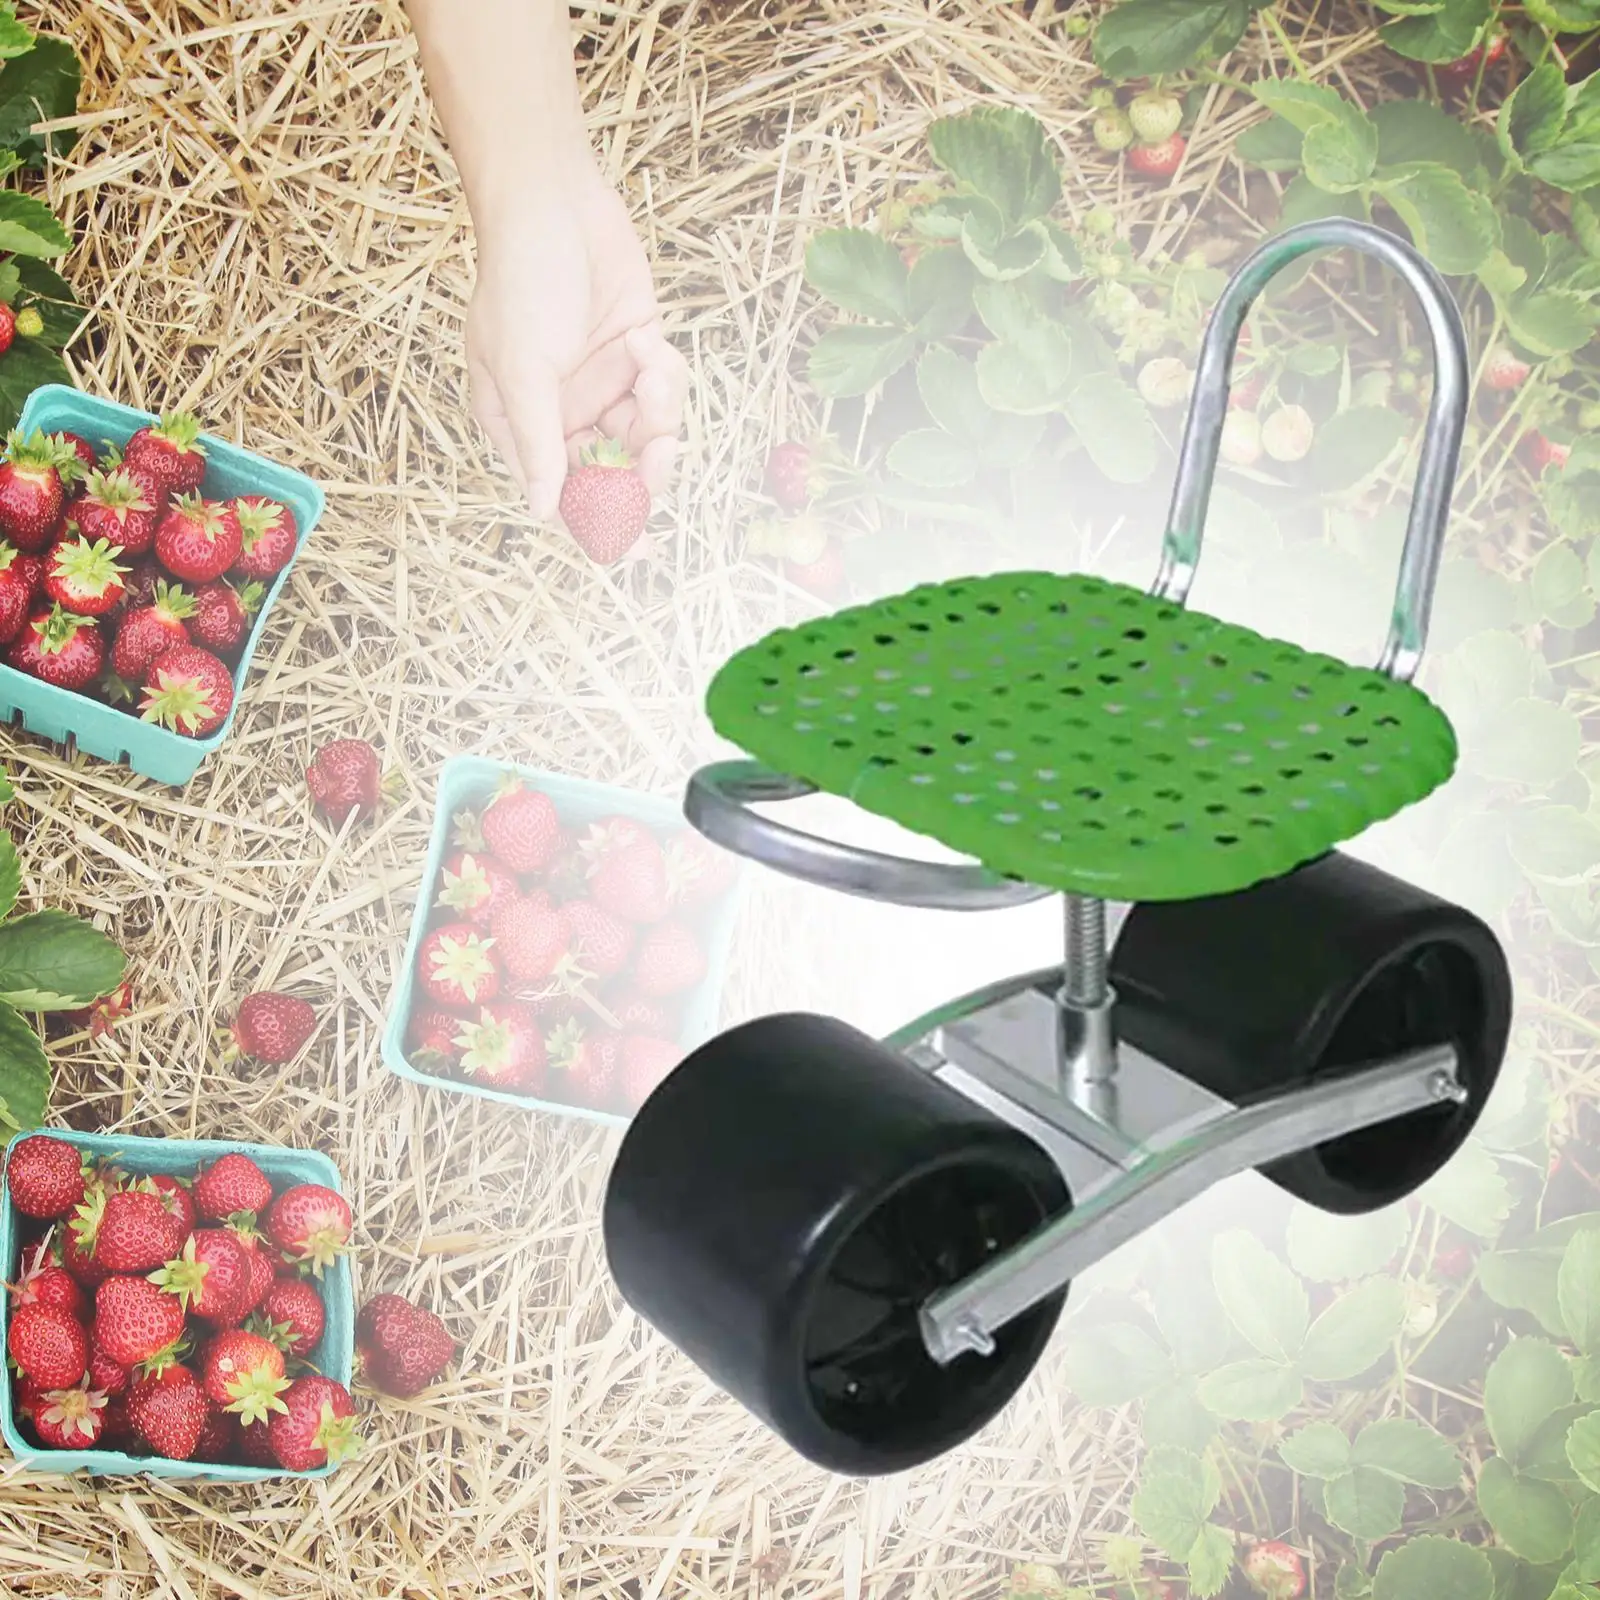 Rolling Seat Adjustable 360° Rotating Rolling Weeding Stool Mobile Backrest Garden Seat for Picking Car Repair Outdoors Yards